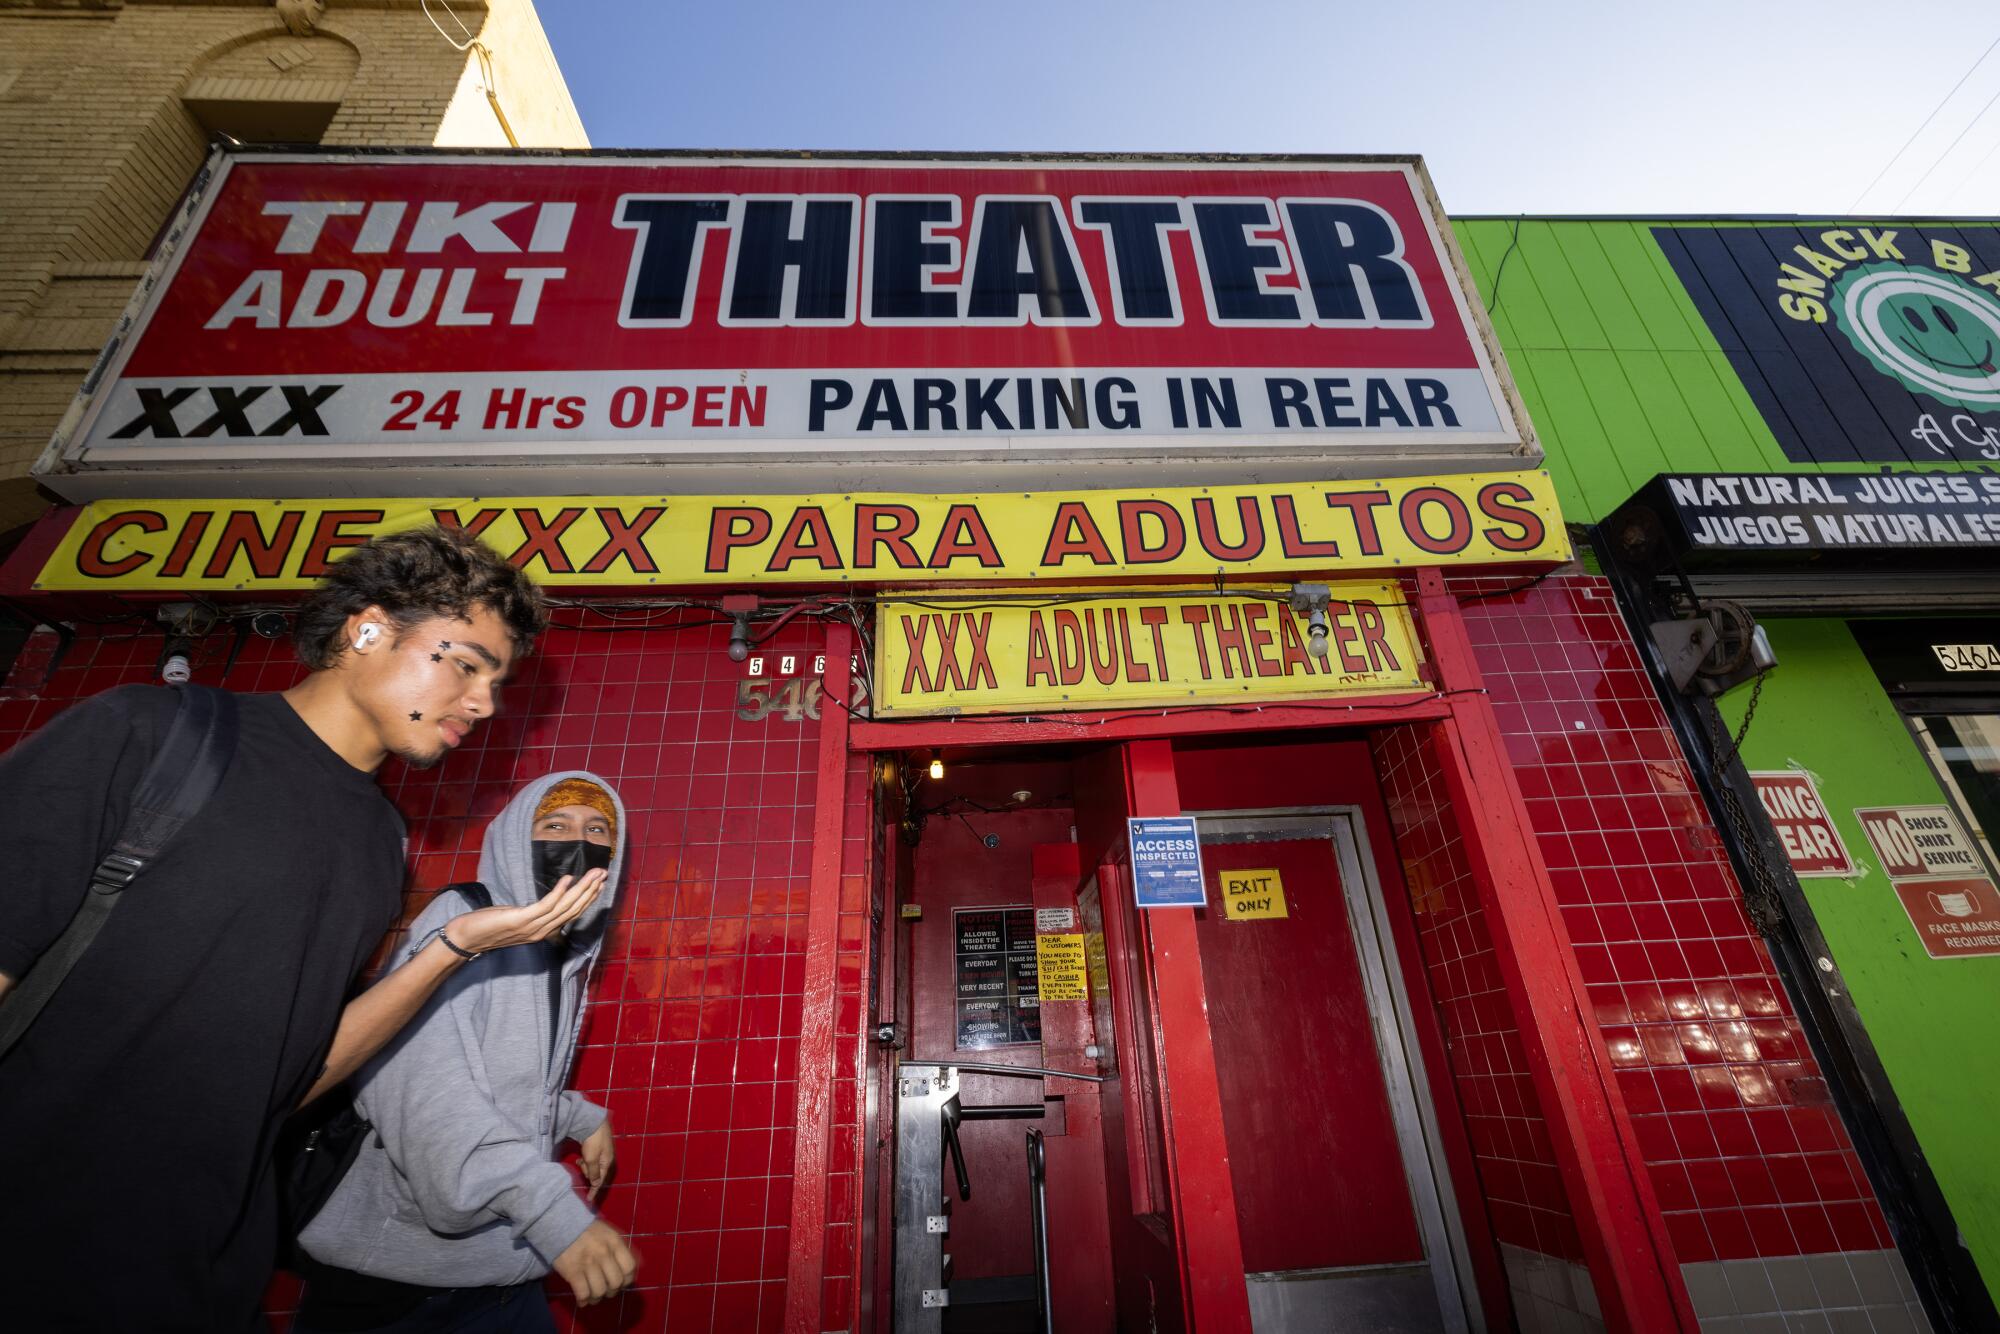 david khan recommends adult theaters in la pic